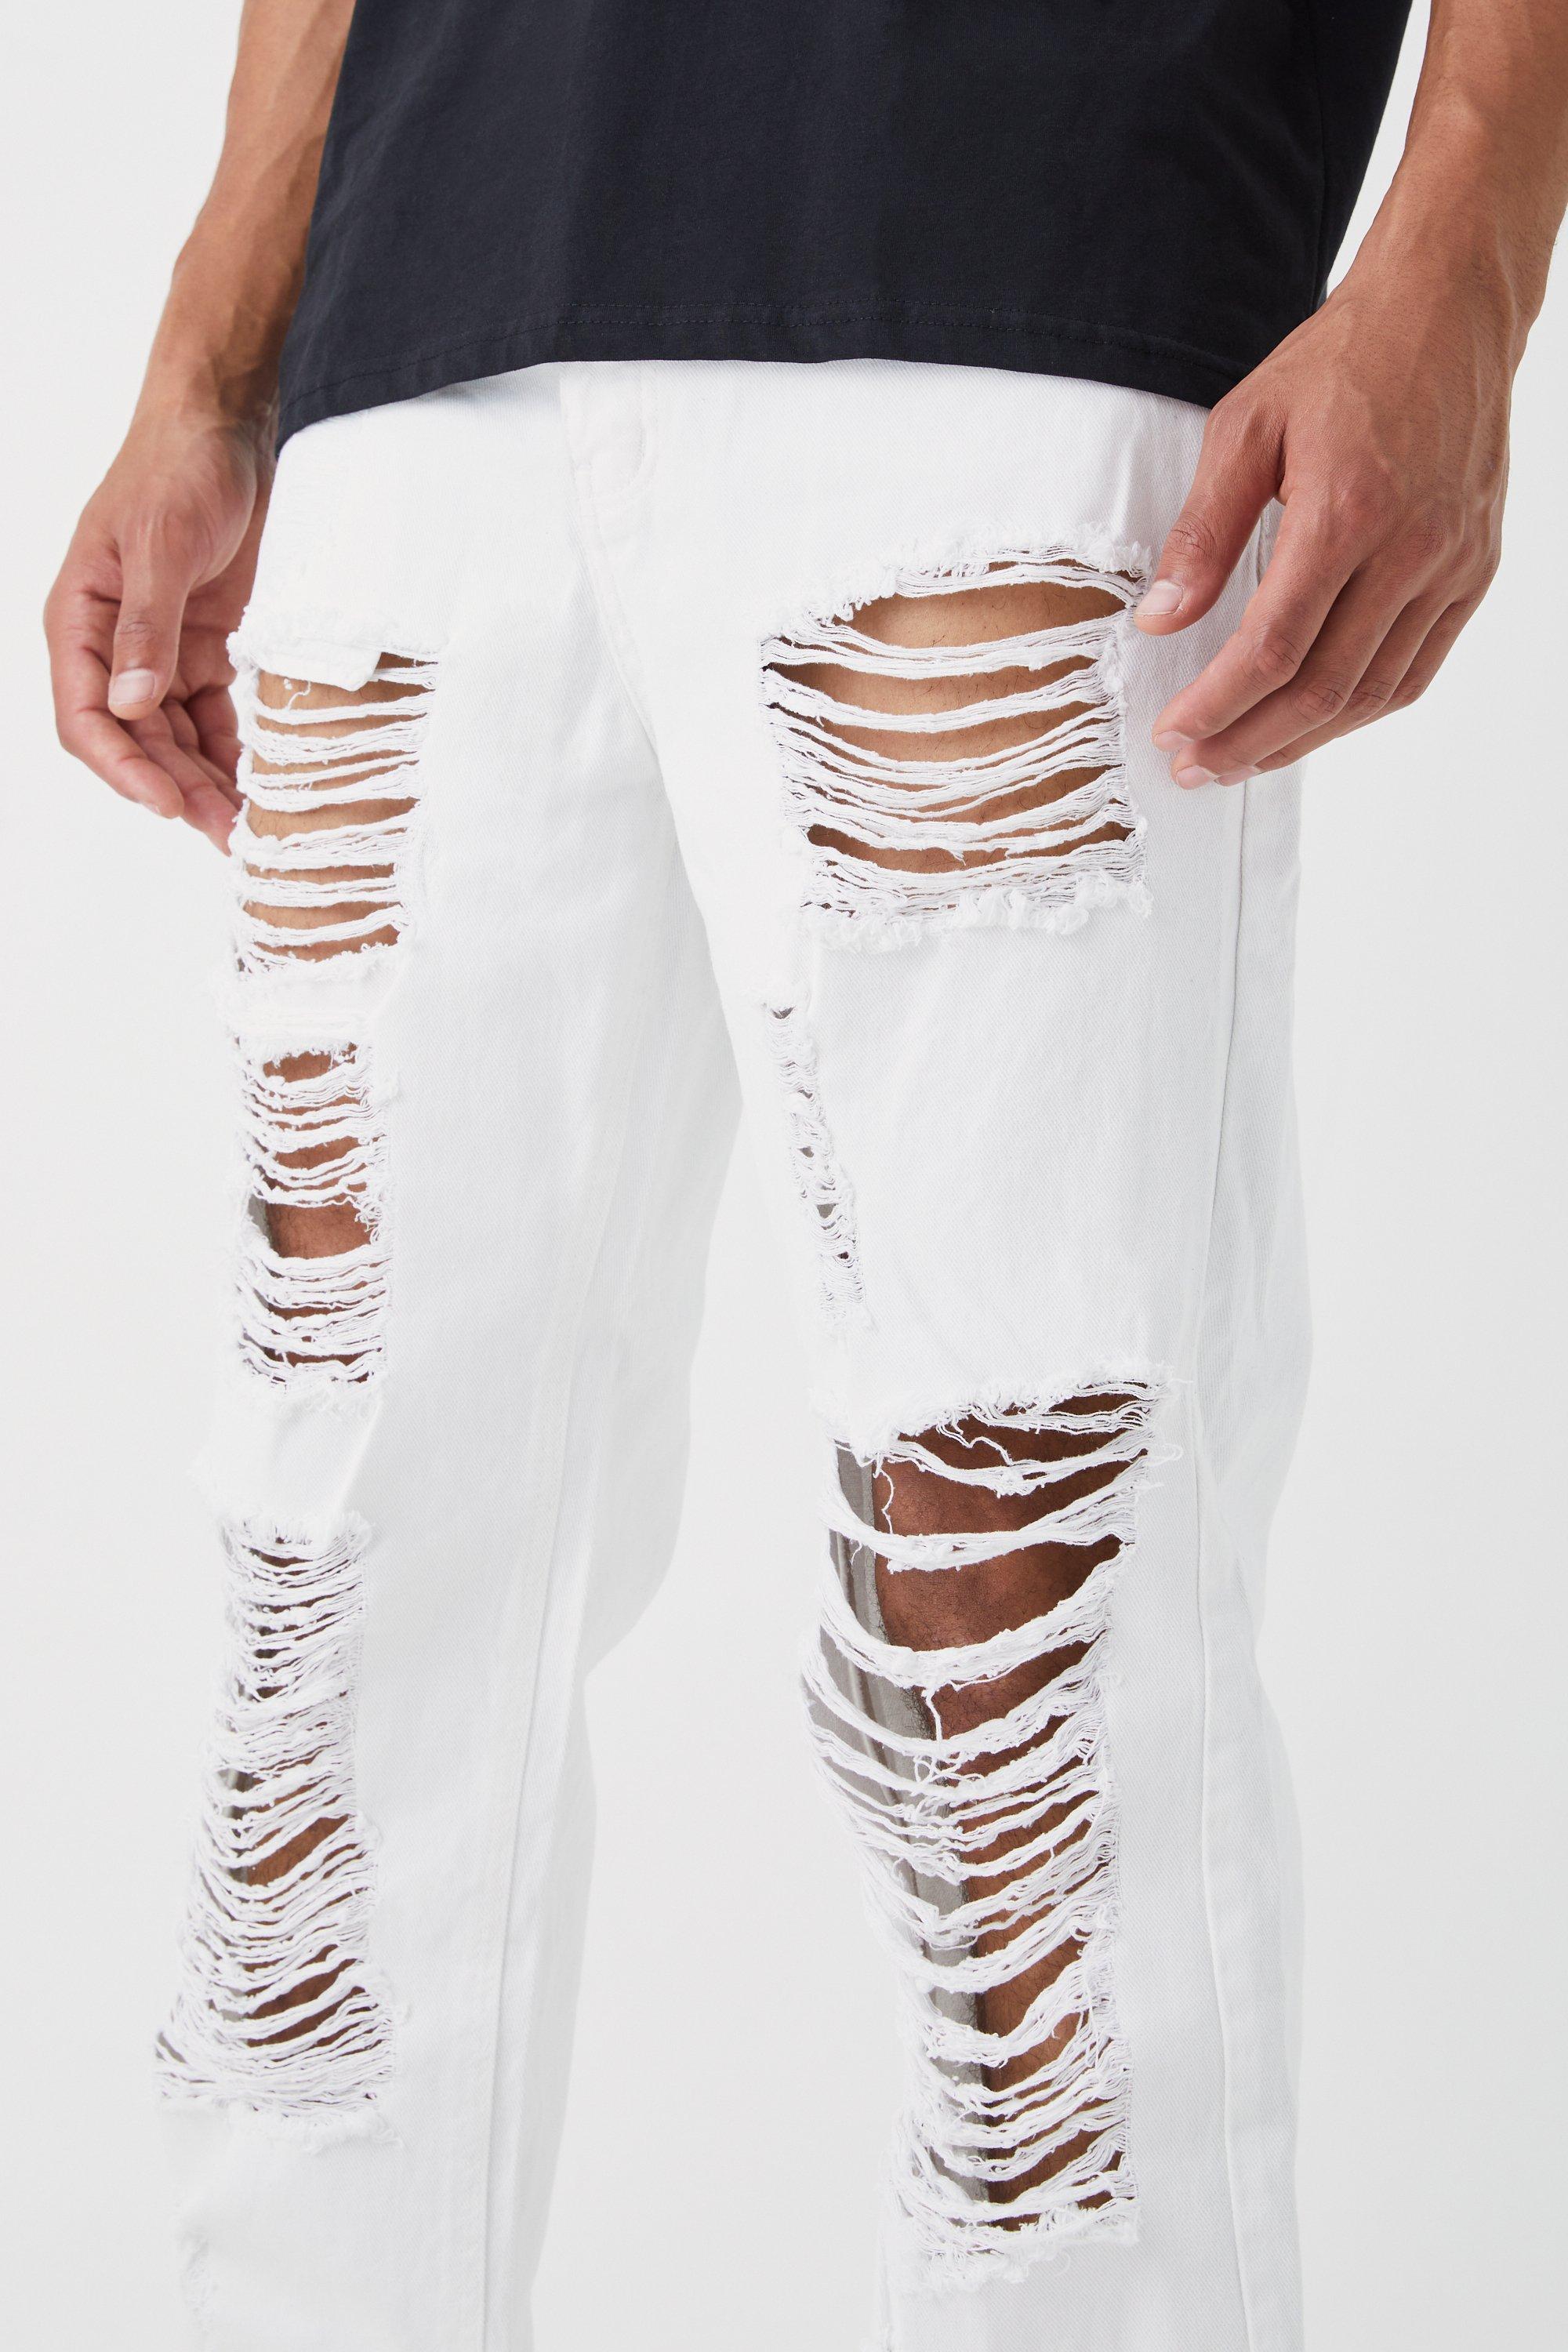 https://media.boohoo.com/i/boohoo/bmm51566_white_xl_2/male-white-tall-relaxed-rigid-extreme-ripped-jeans